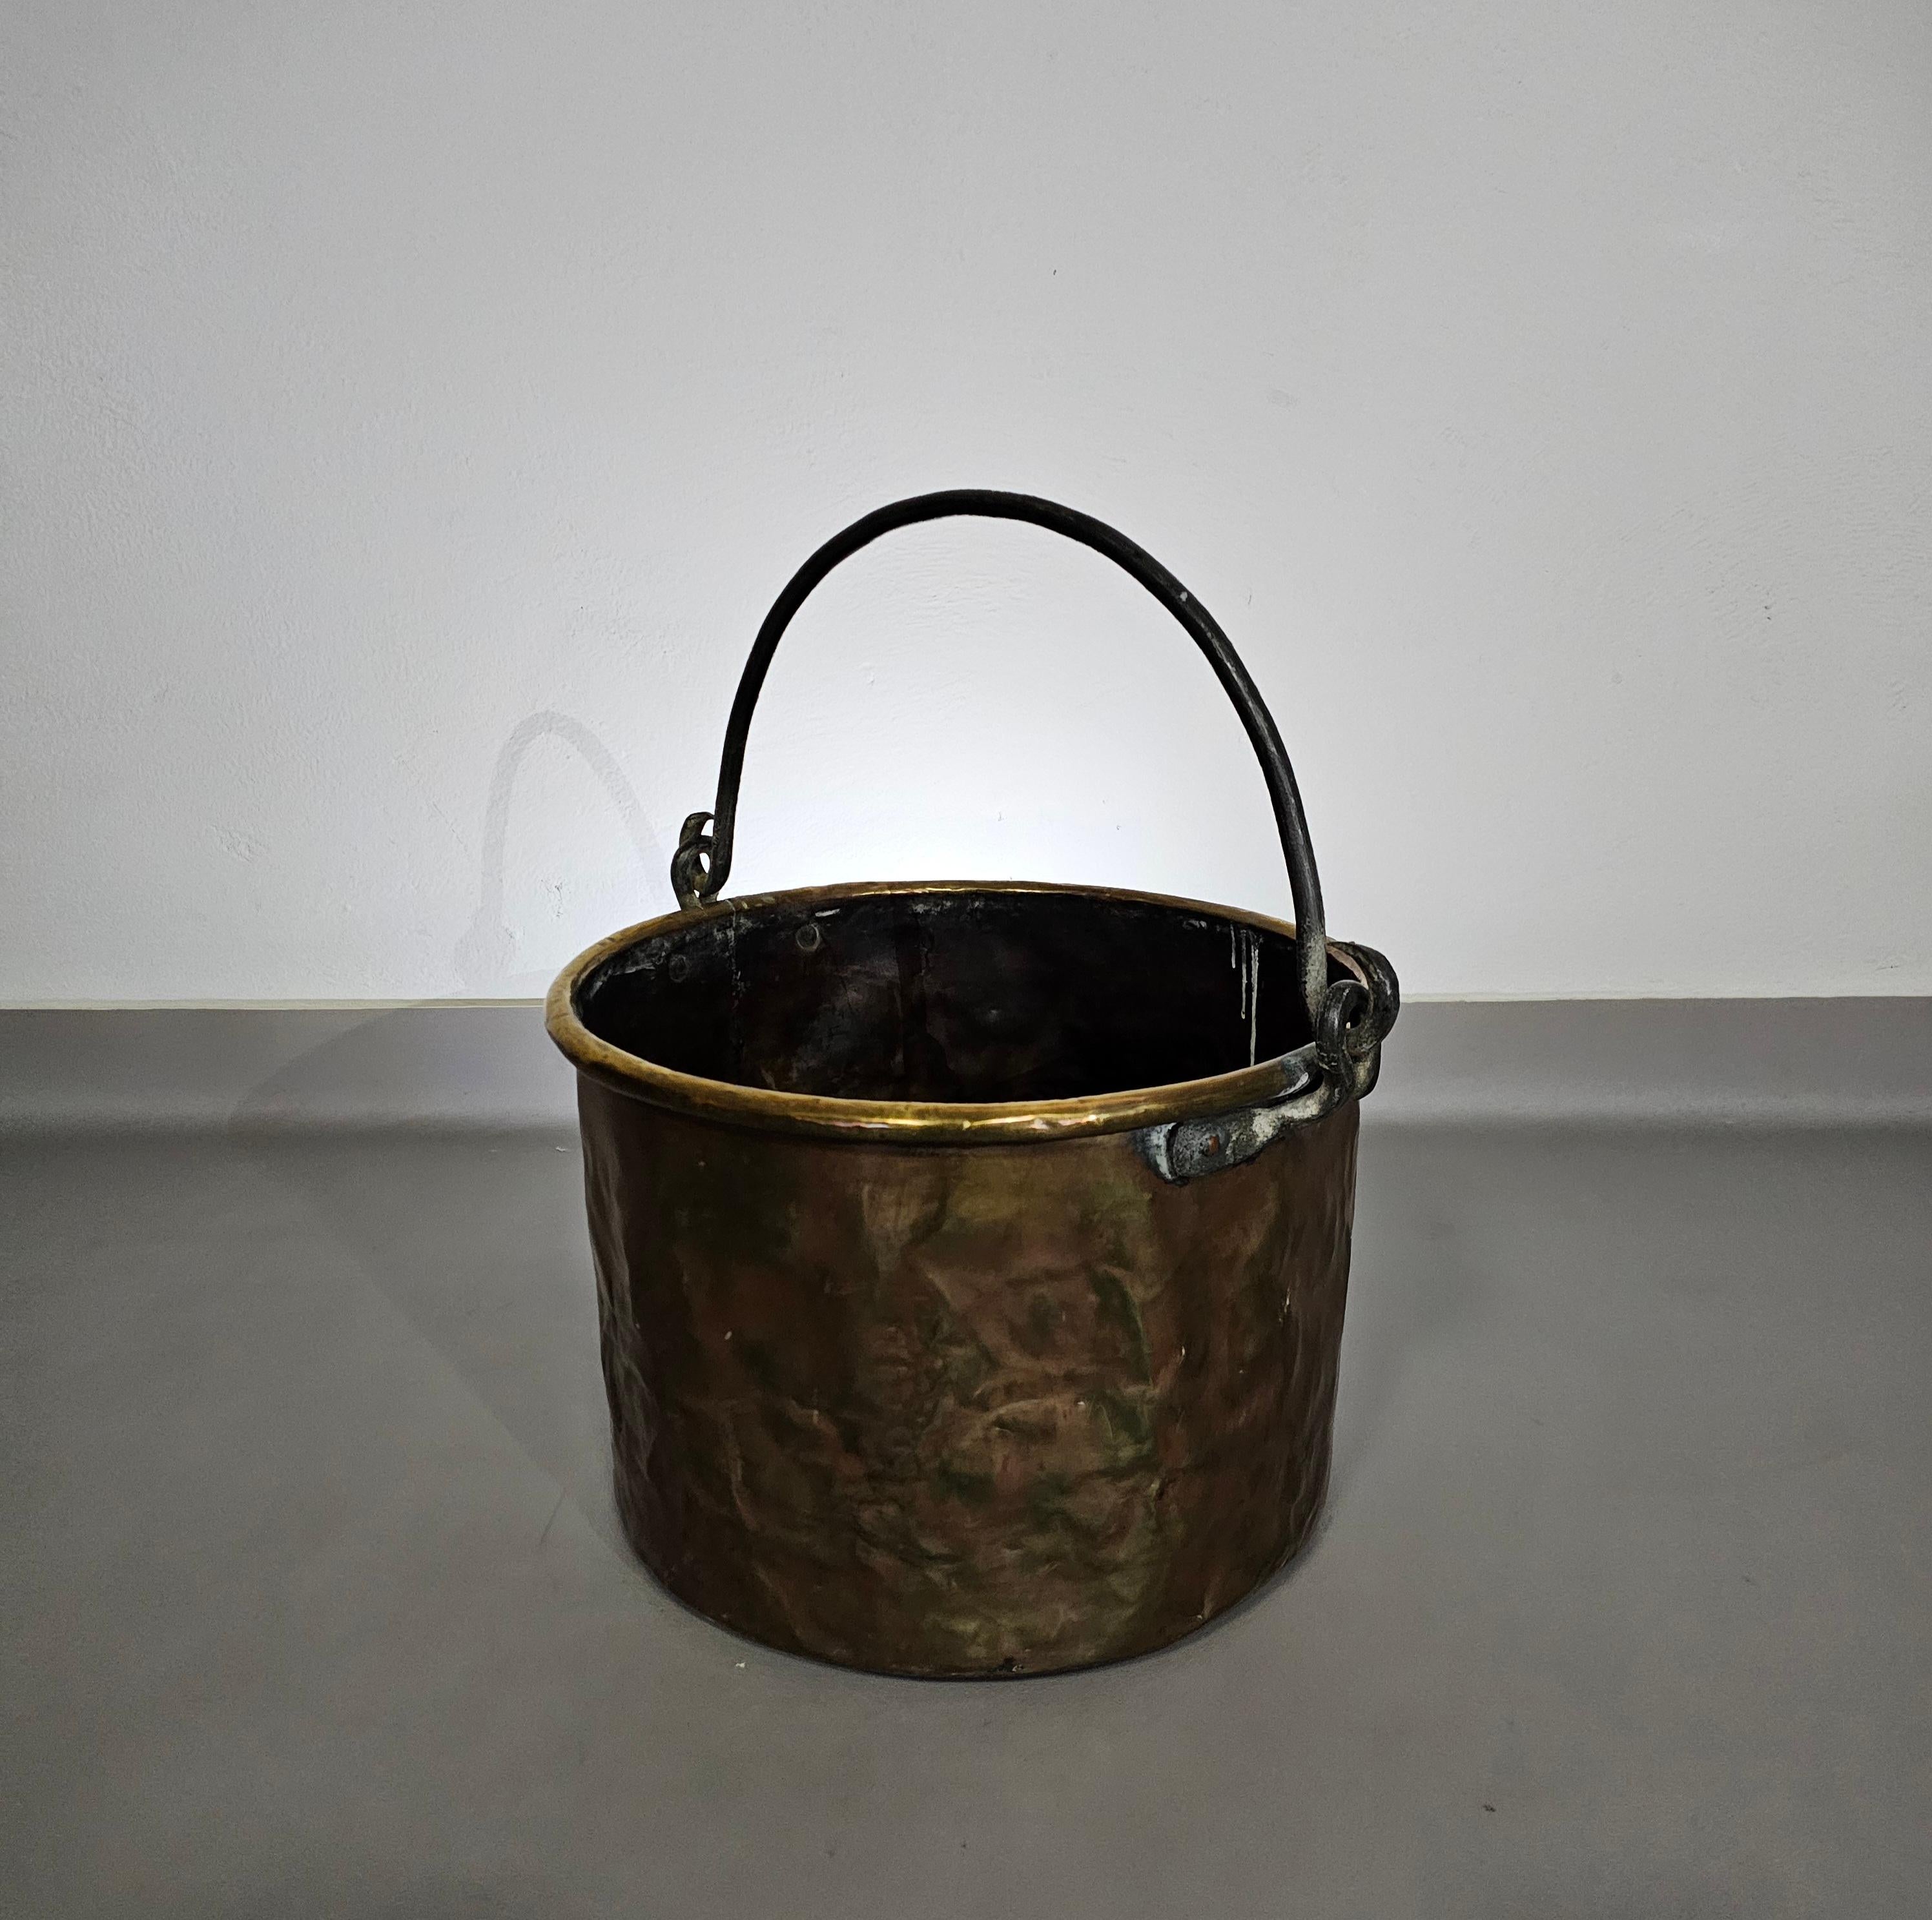  Dutch / Handled Fireplace - Copper / Brass - Bucket  In Good Condition For Sale In WEERT, NL